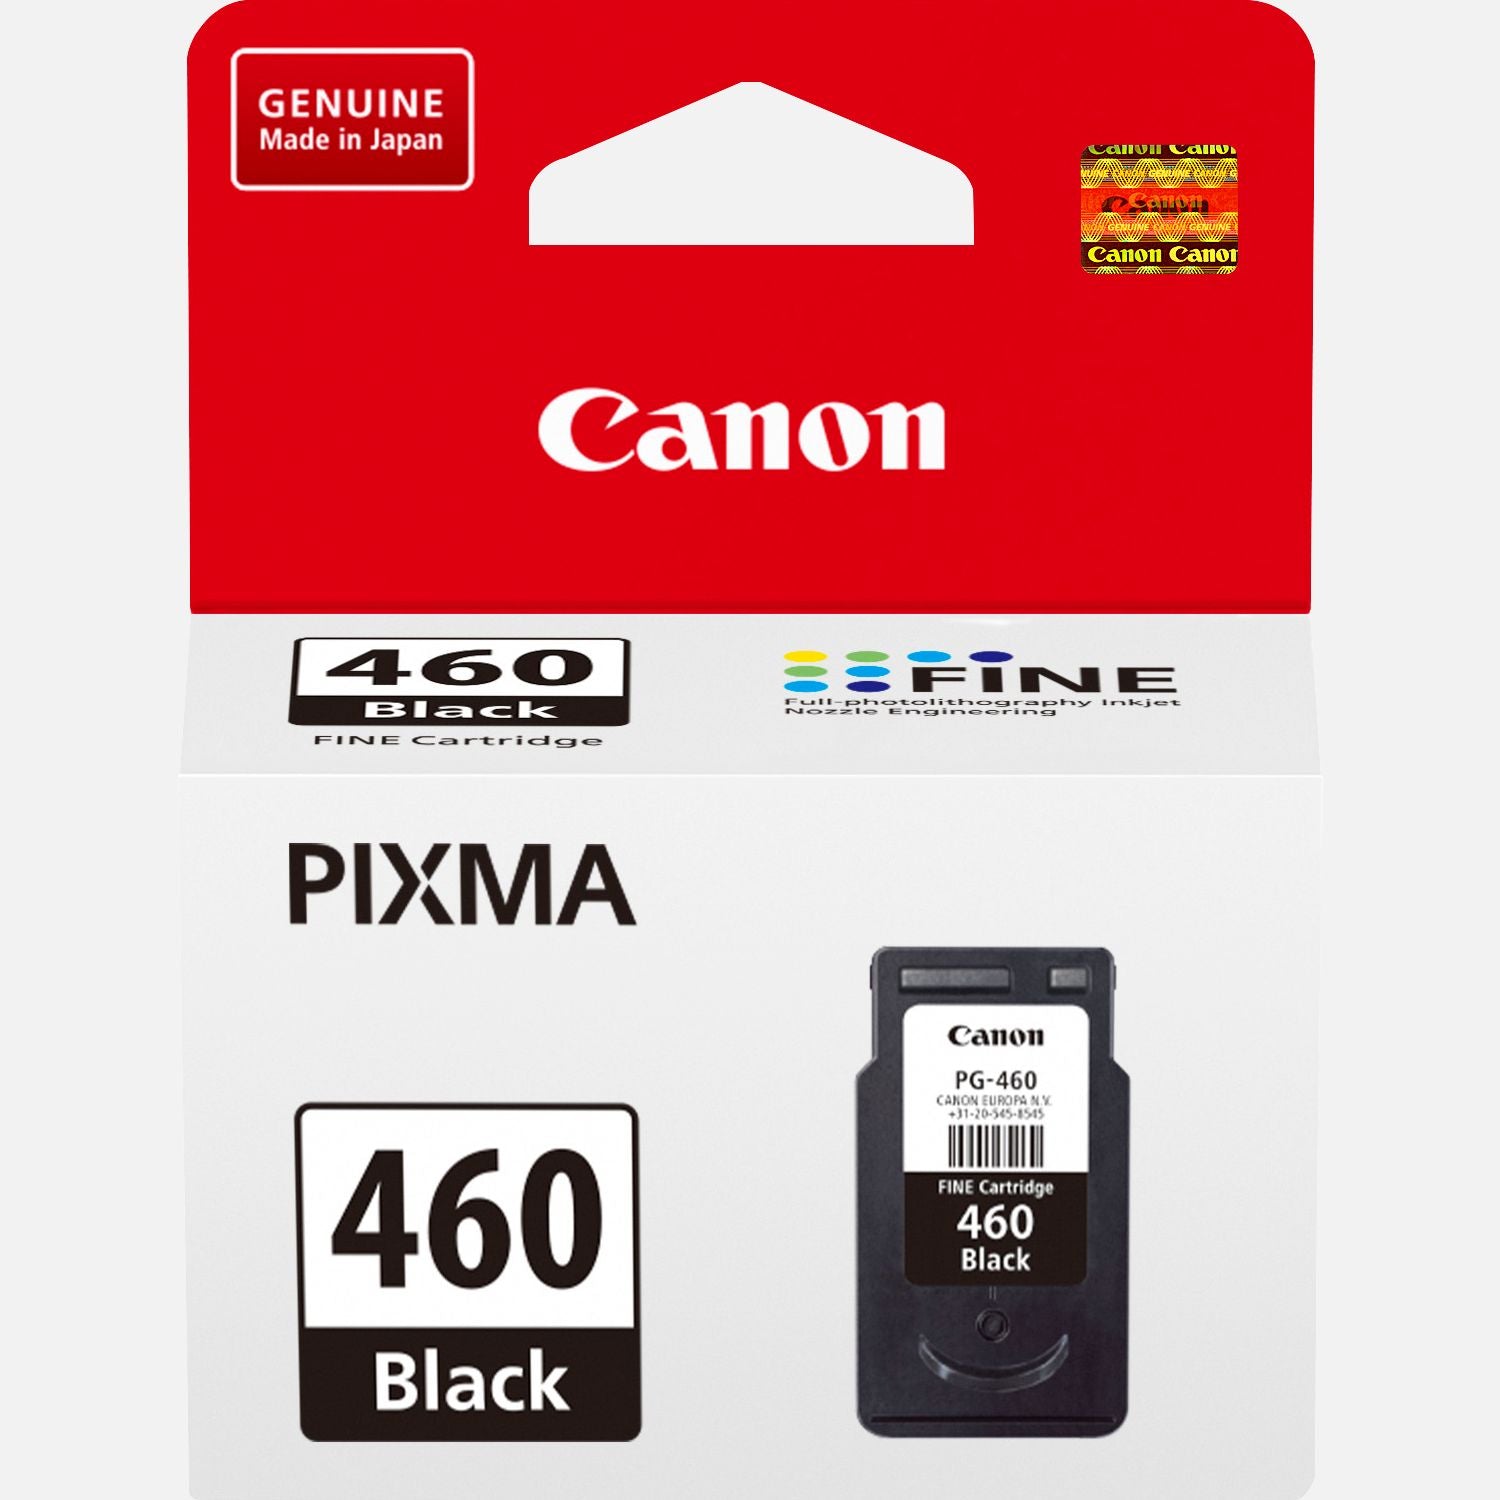 Canon  Ink Cartridges for  Pixma TS5340 and TS7440